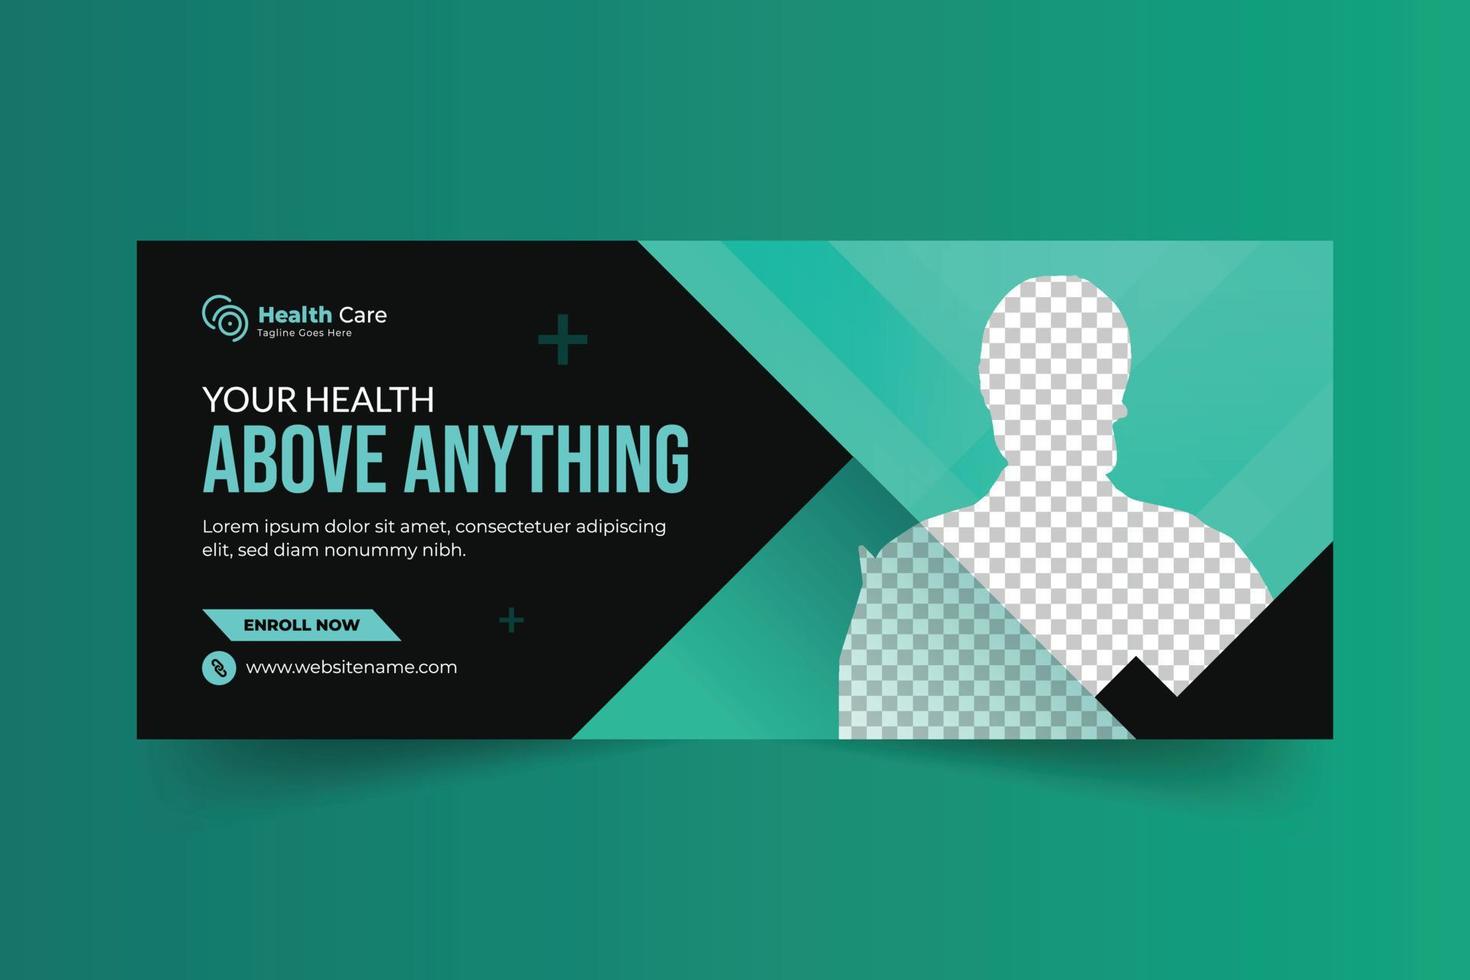 Healthcare web banner design and social media cover template vector